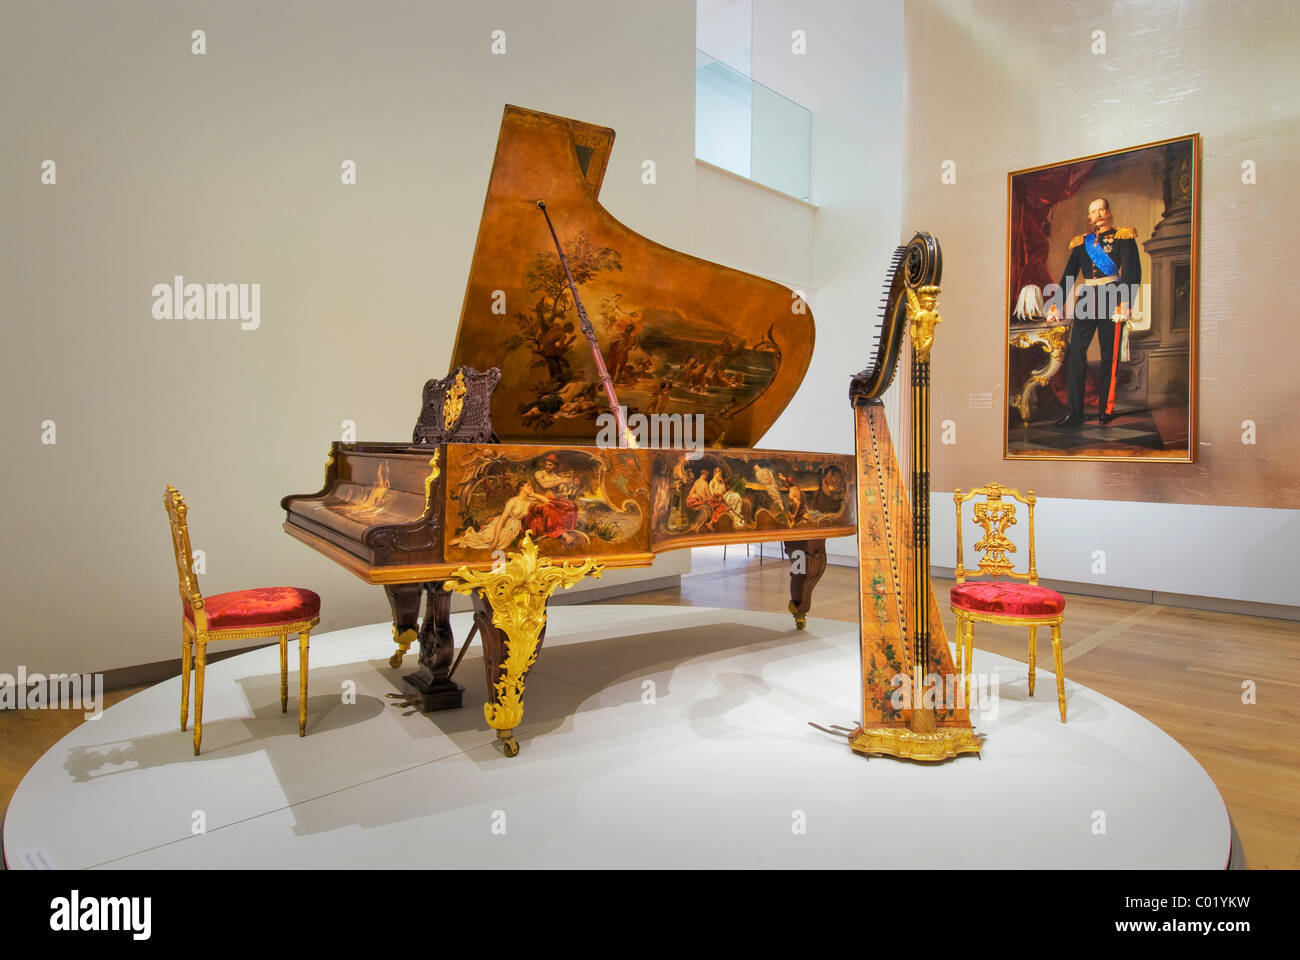 Painted Piano Museum High Resolution Stock Photography and Images - Alamy